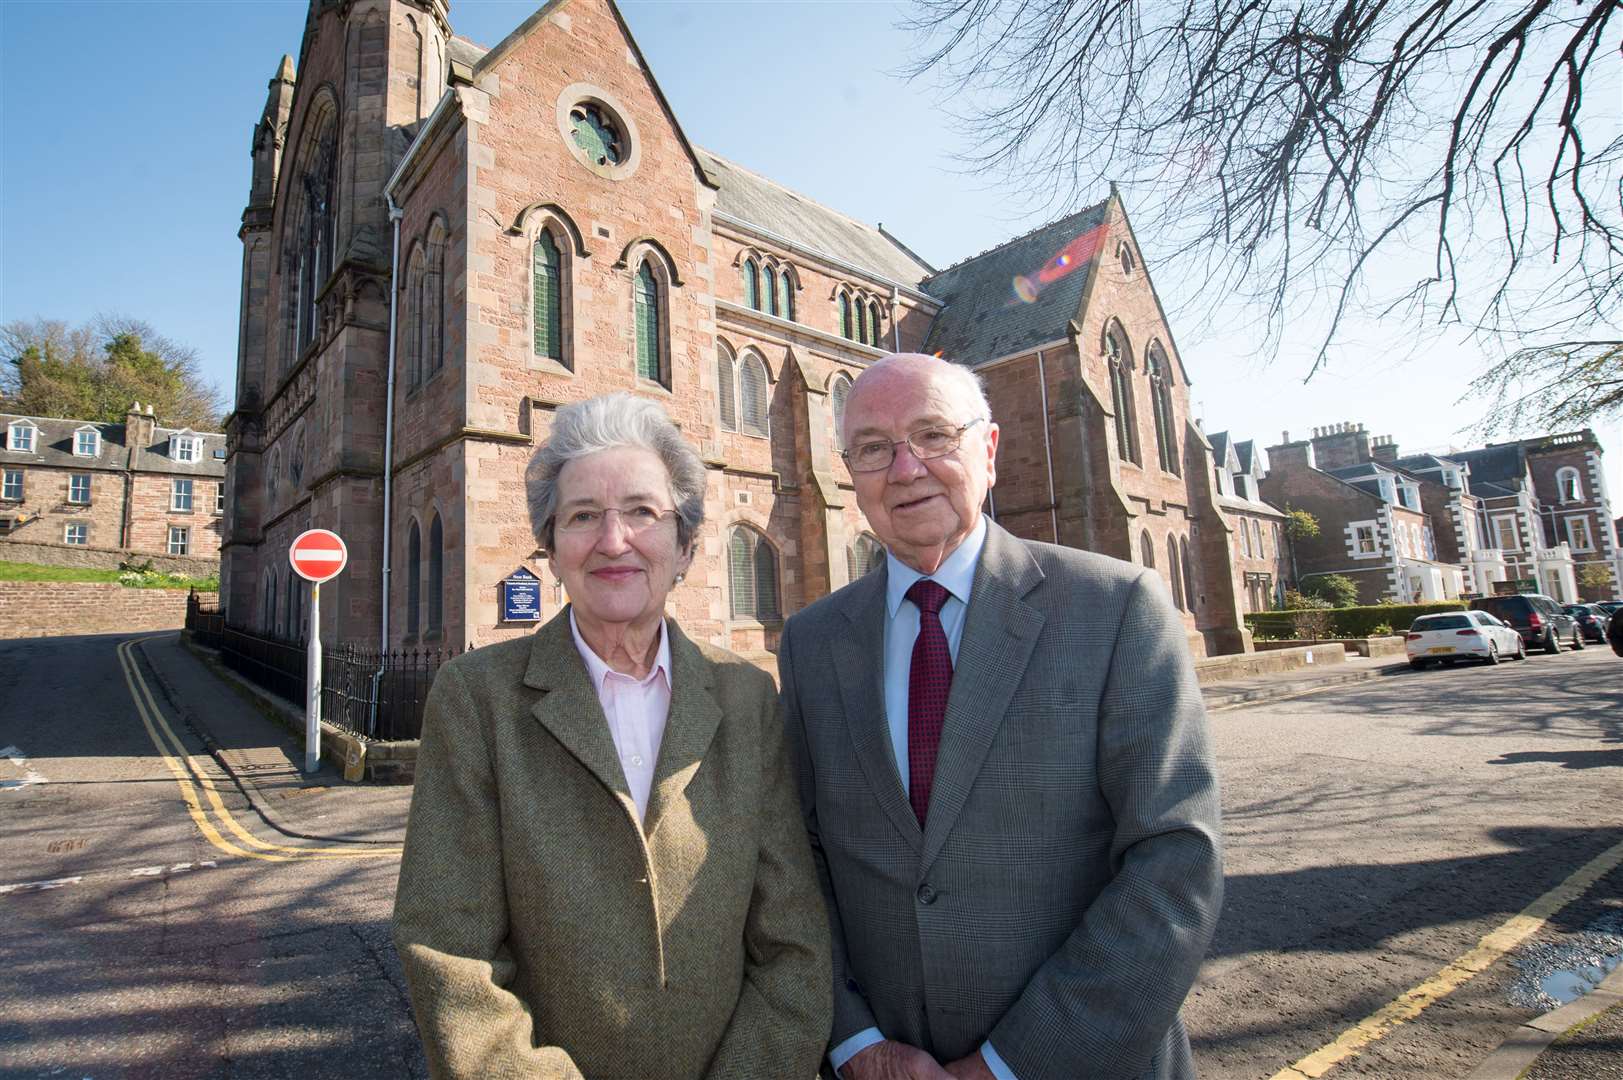 Sheila Proudfoot and William Simpson of Ness Bank Church among 93 men and 93 women chosen from across the UK to receive Maundy Money from the Queen at Windsor Castle next week. Afterwards they will attend lunch with the Queen. ..Picture: Callum Mackay. Image No. 043673.